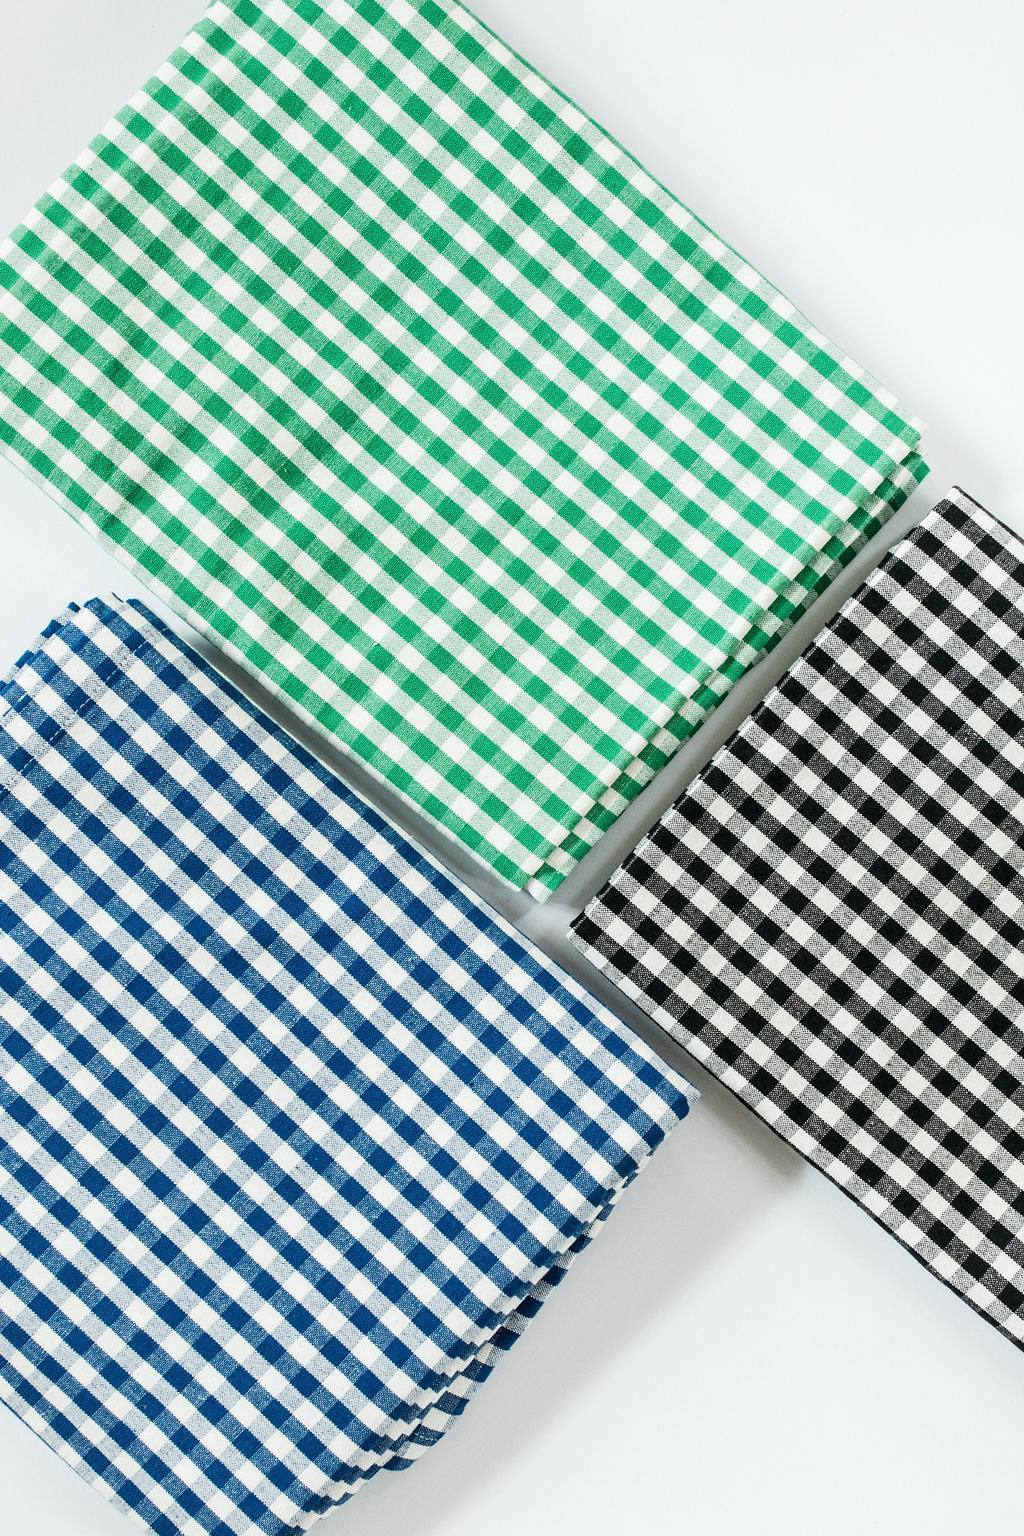 Gingham Check Green Table Cloth